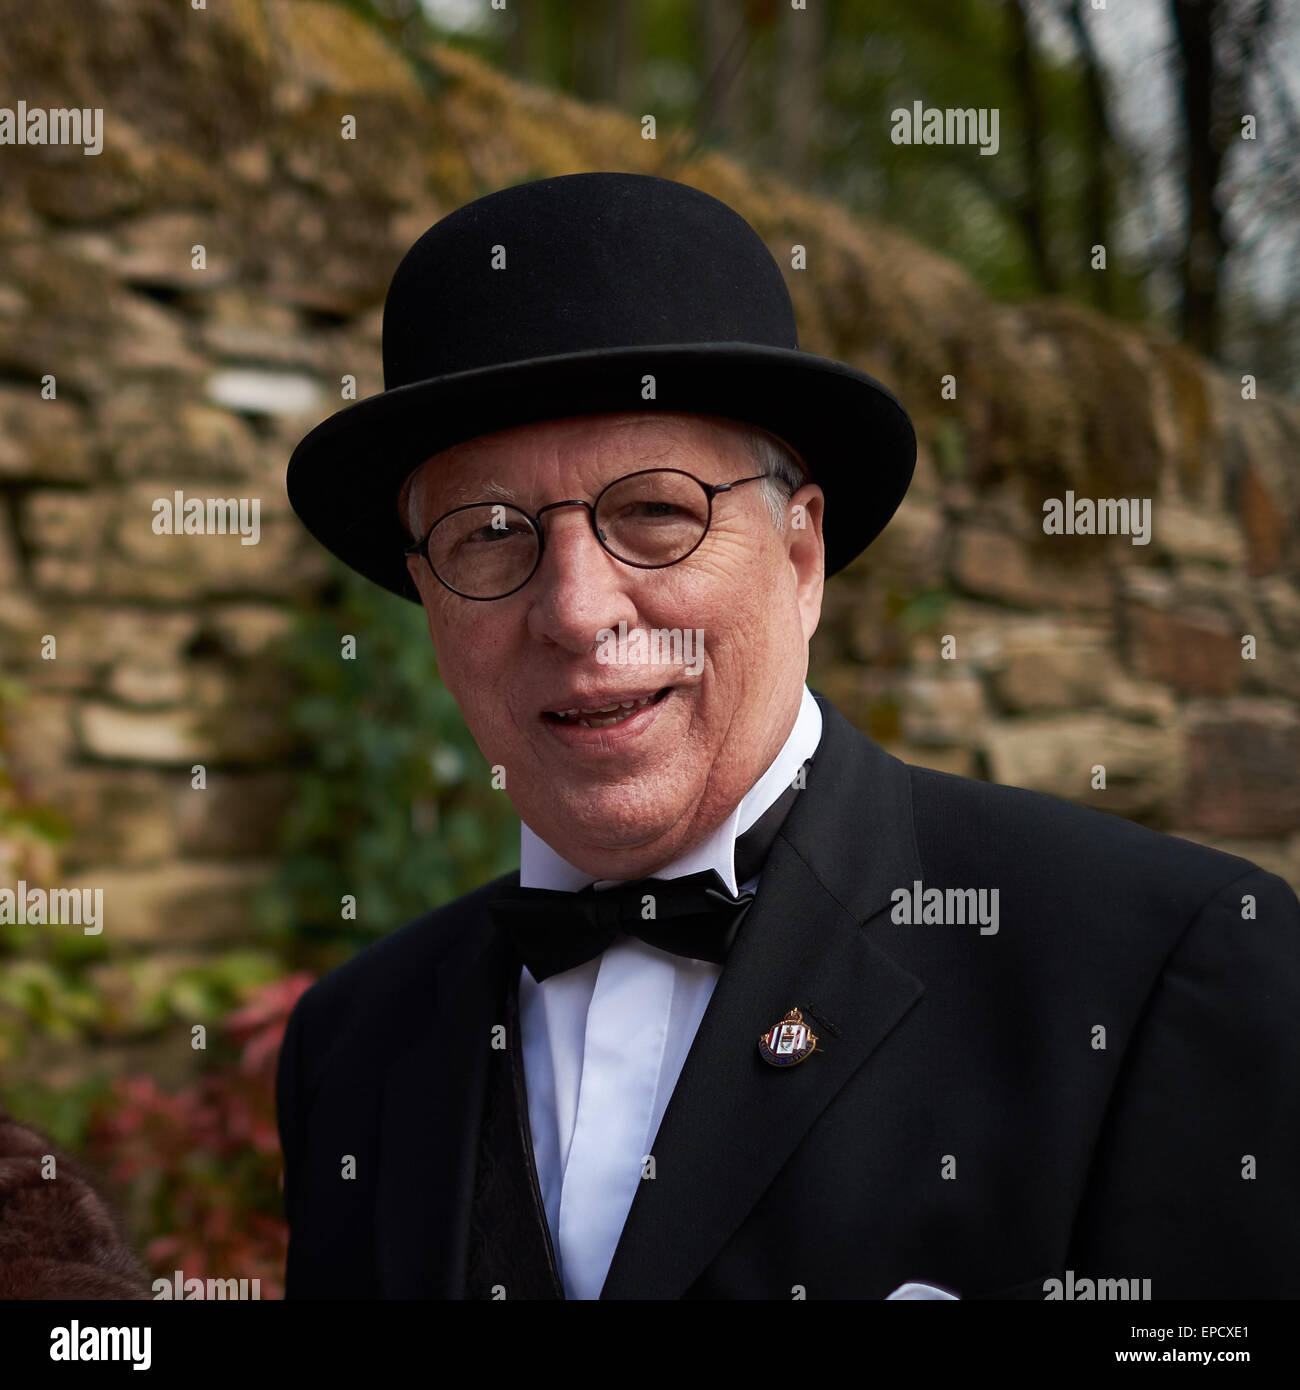 1940s city banker gent with bowler hat and suit Stock Photo - Alamy